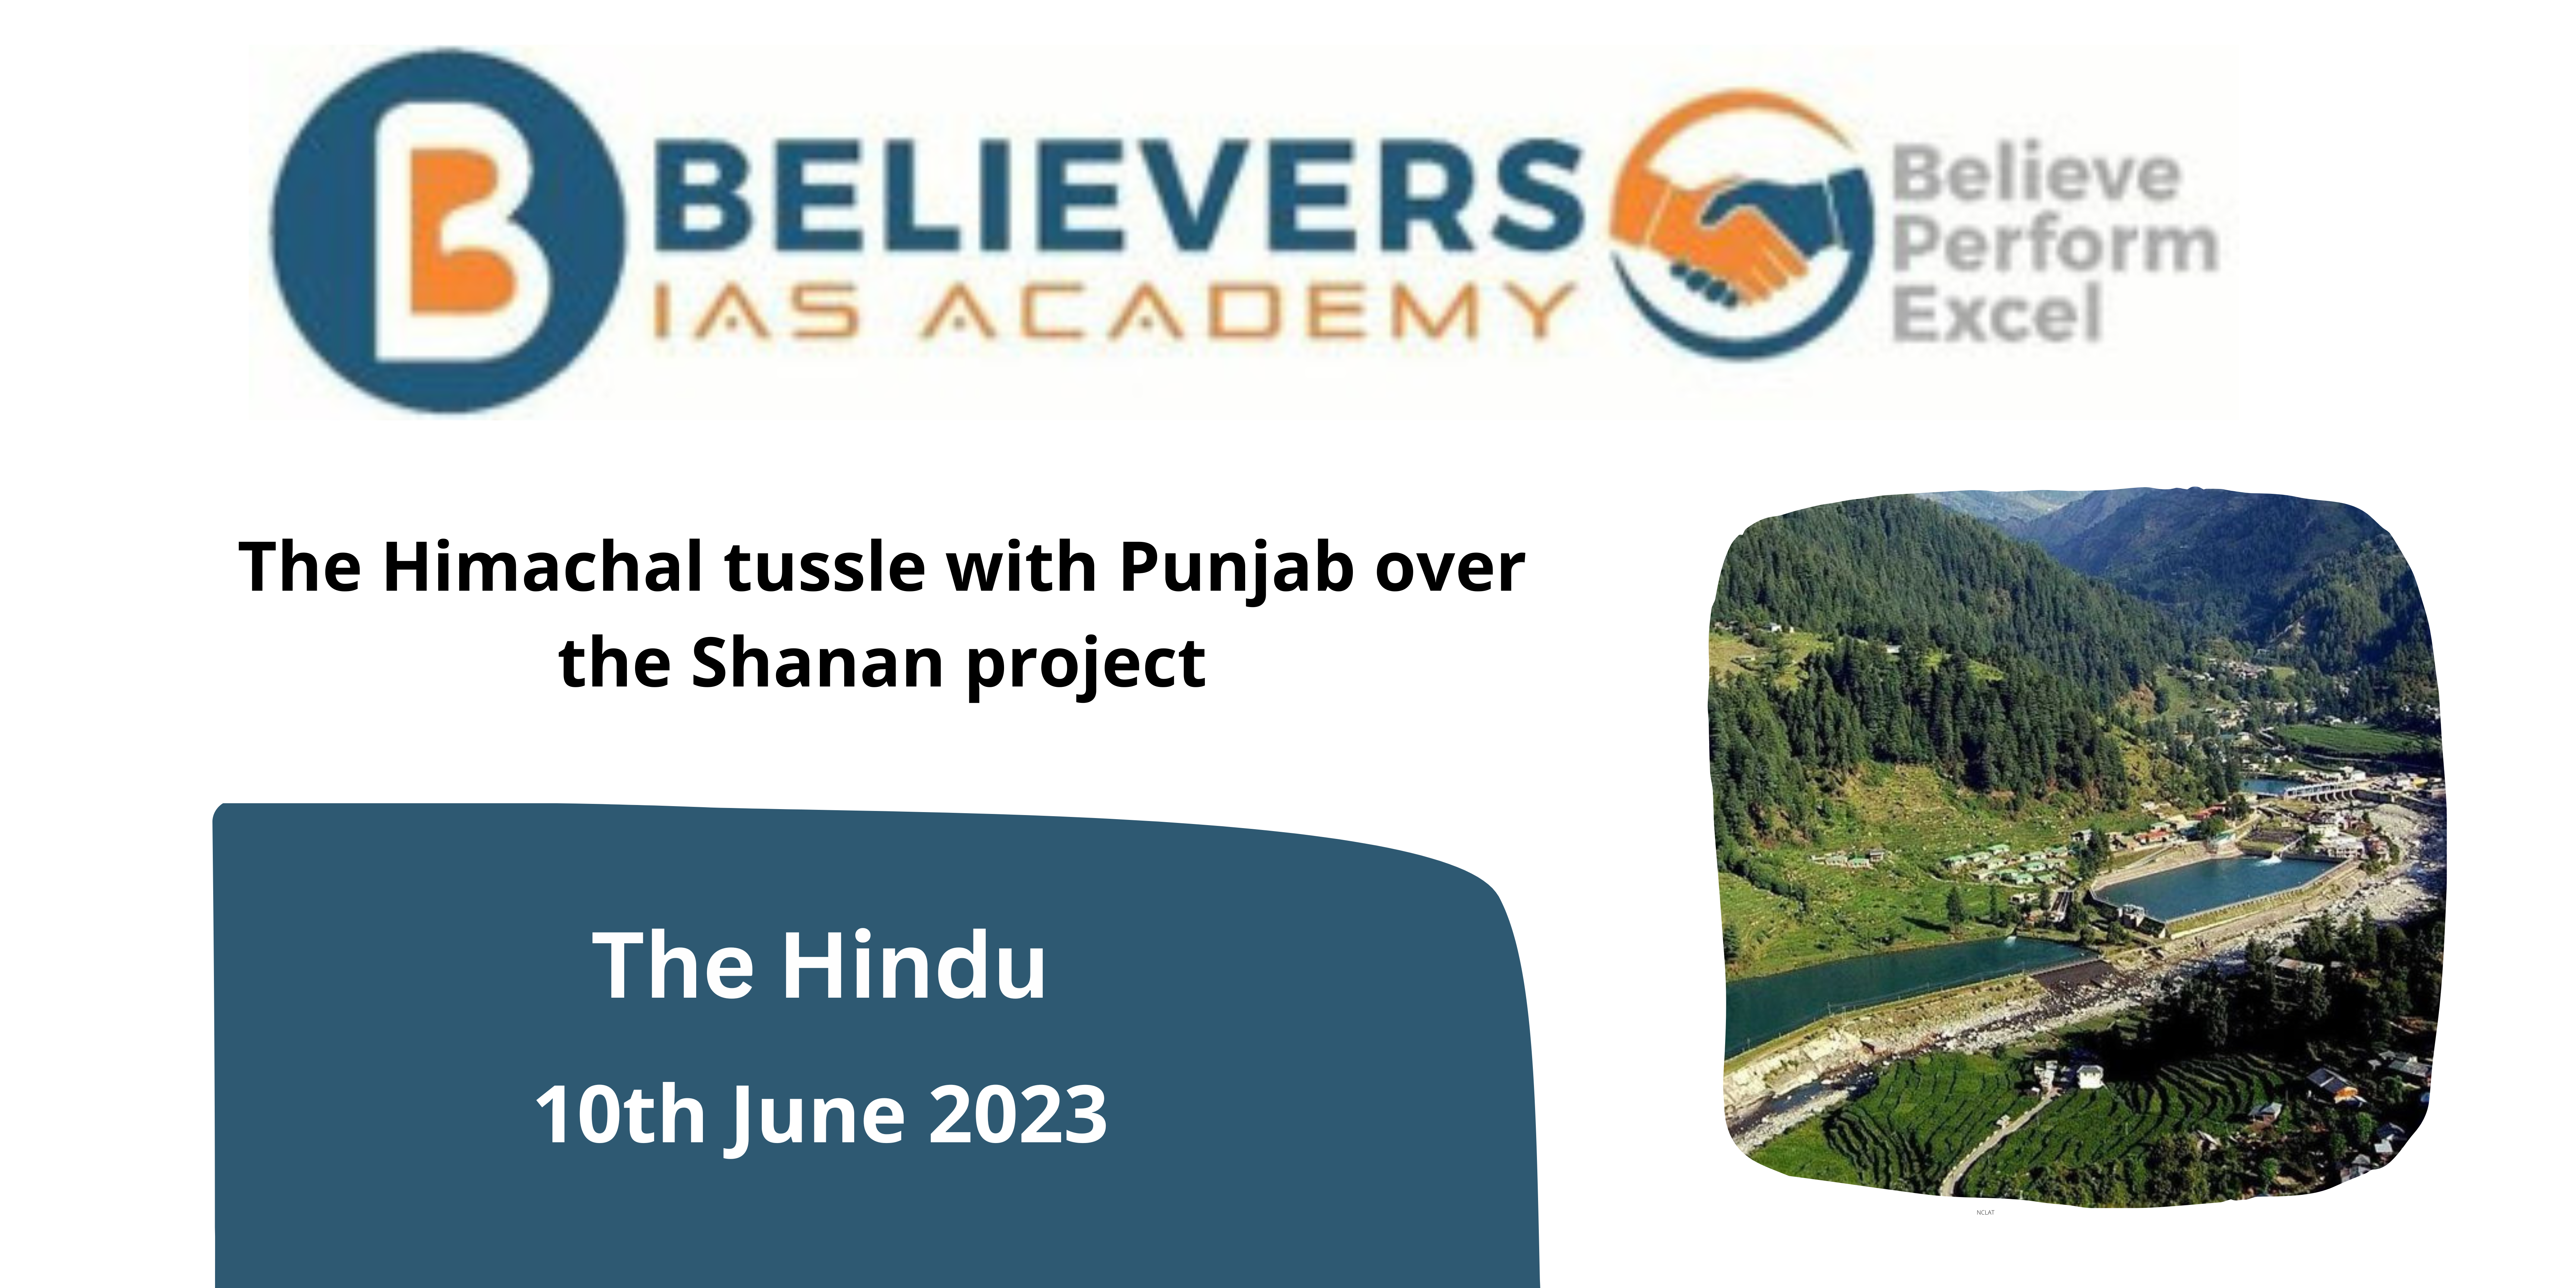 The Himachal tussle with Punjab over the Shanan project